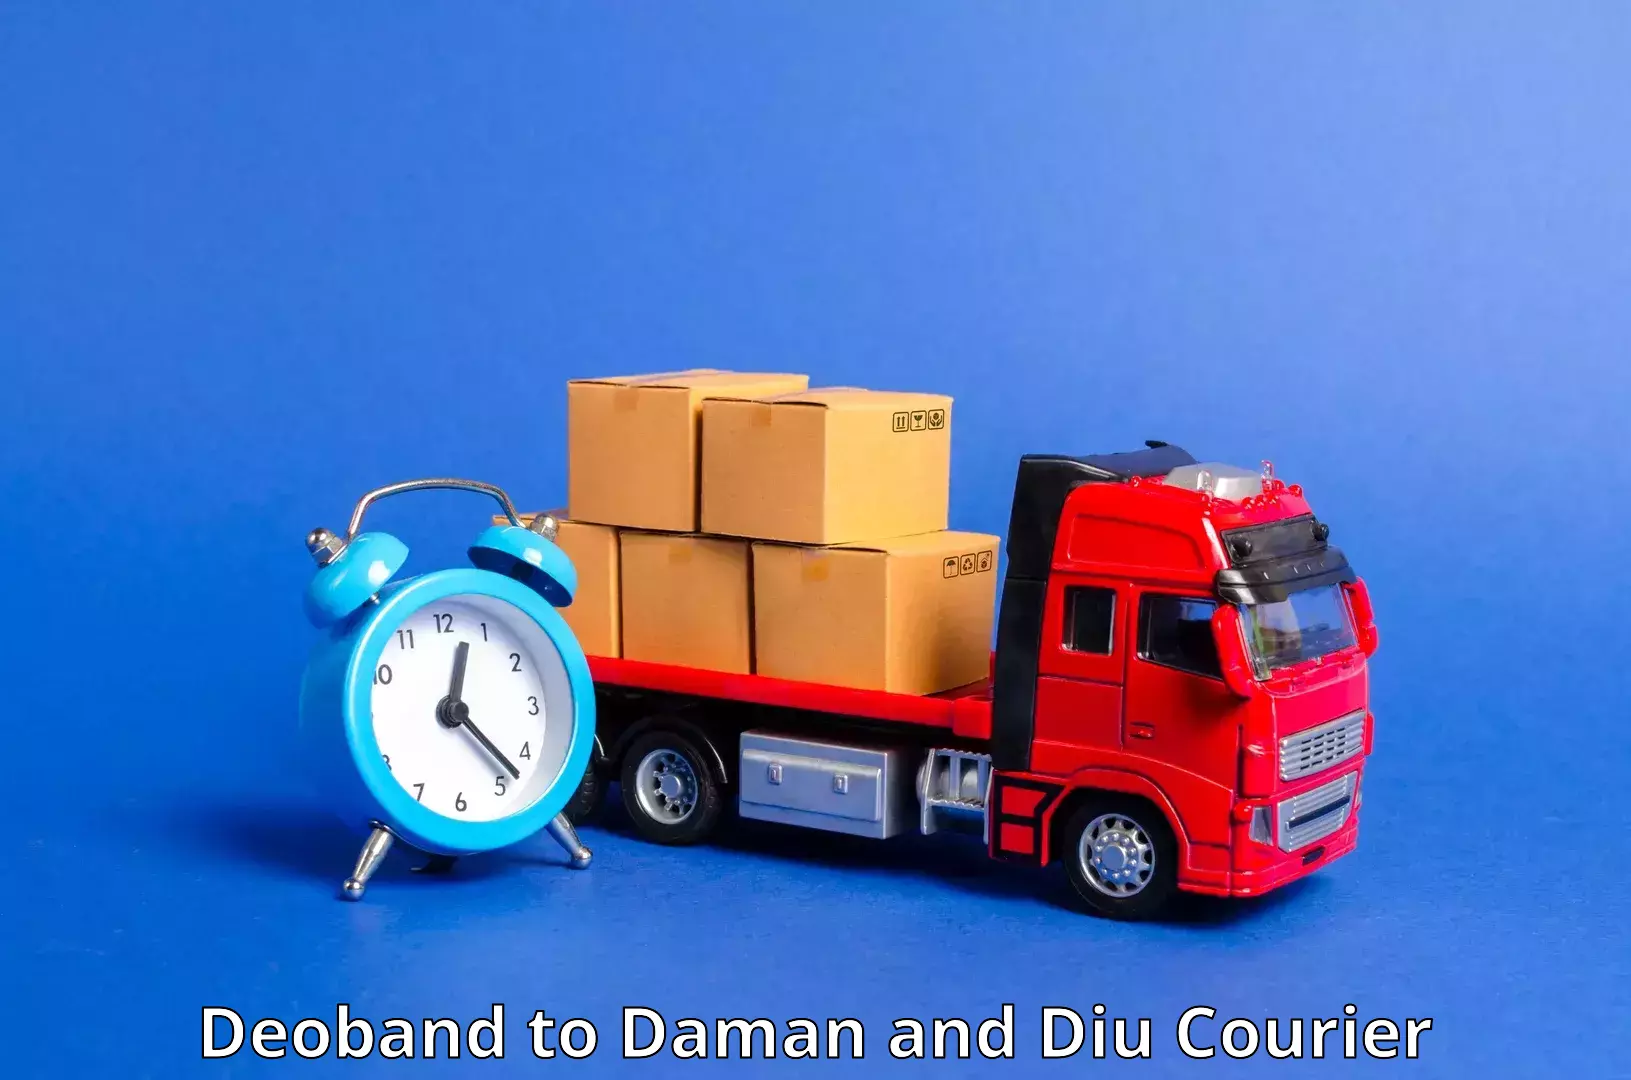 Affordable parcel service Deoband to Daman and Diu